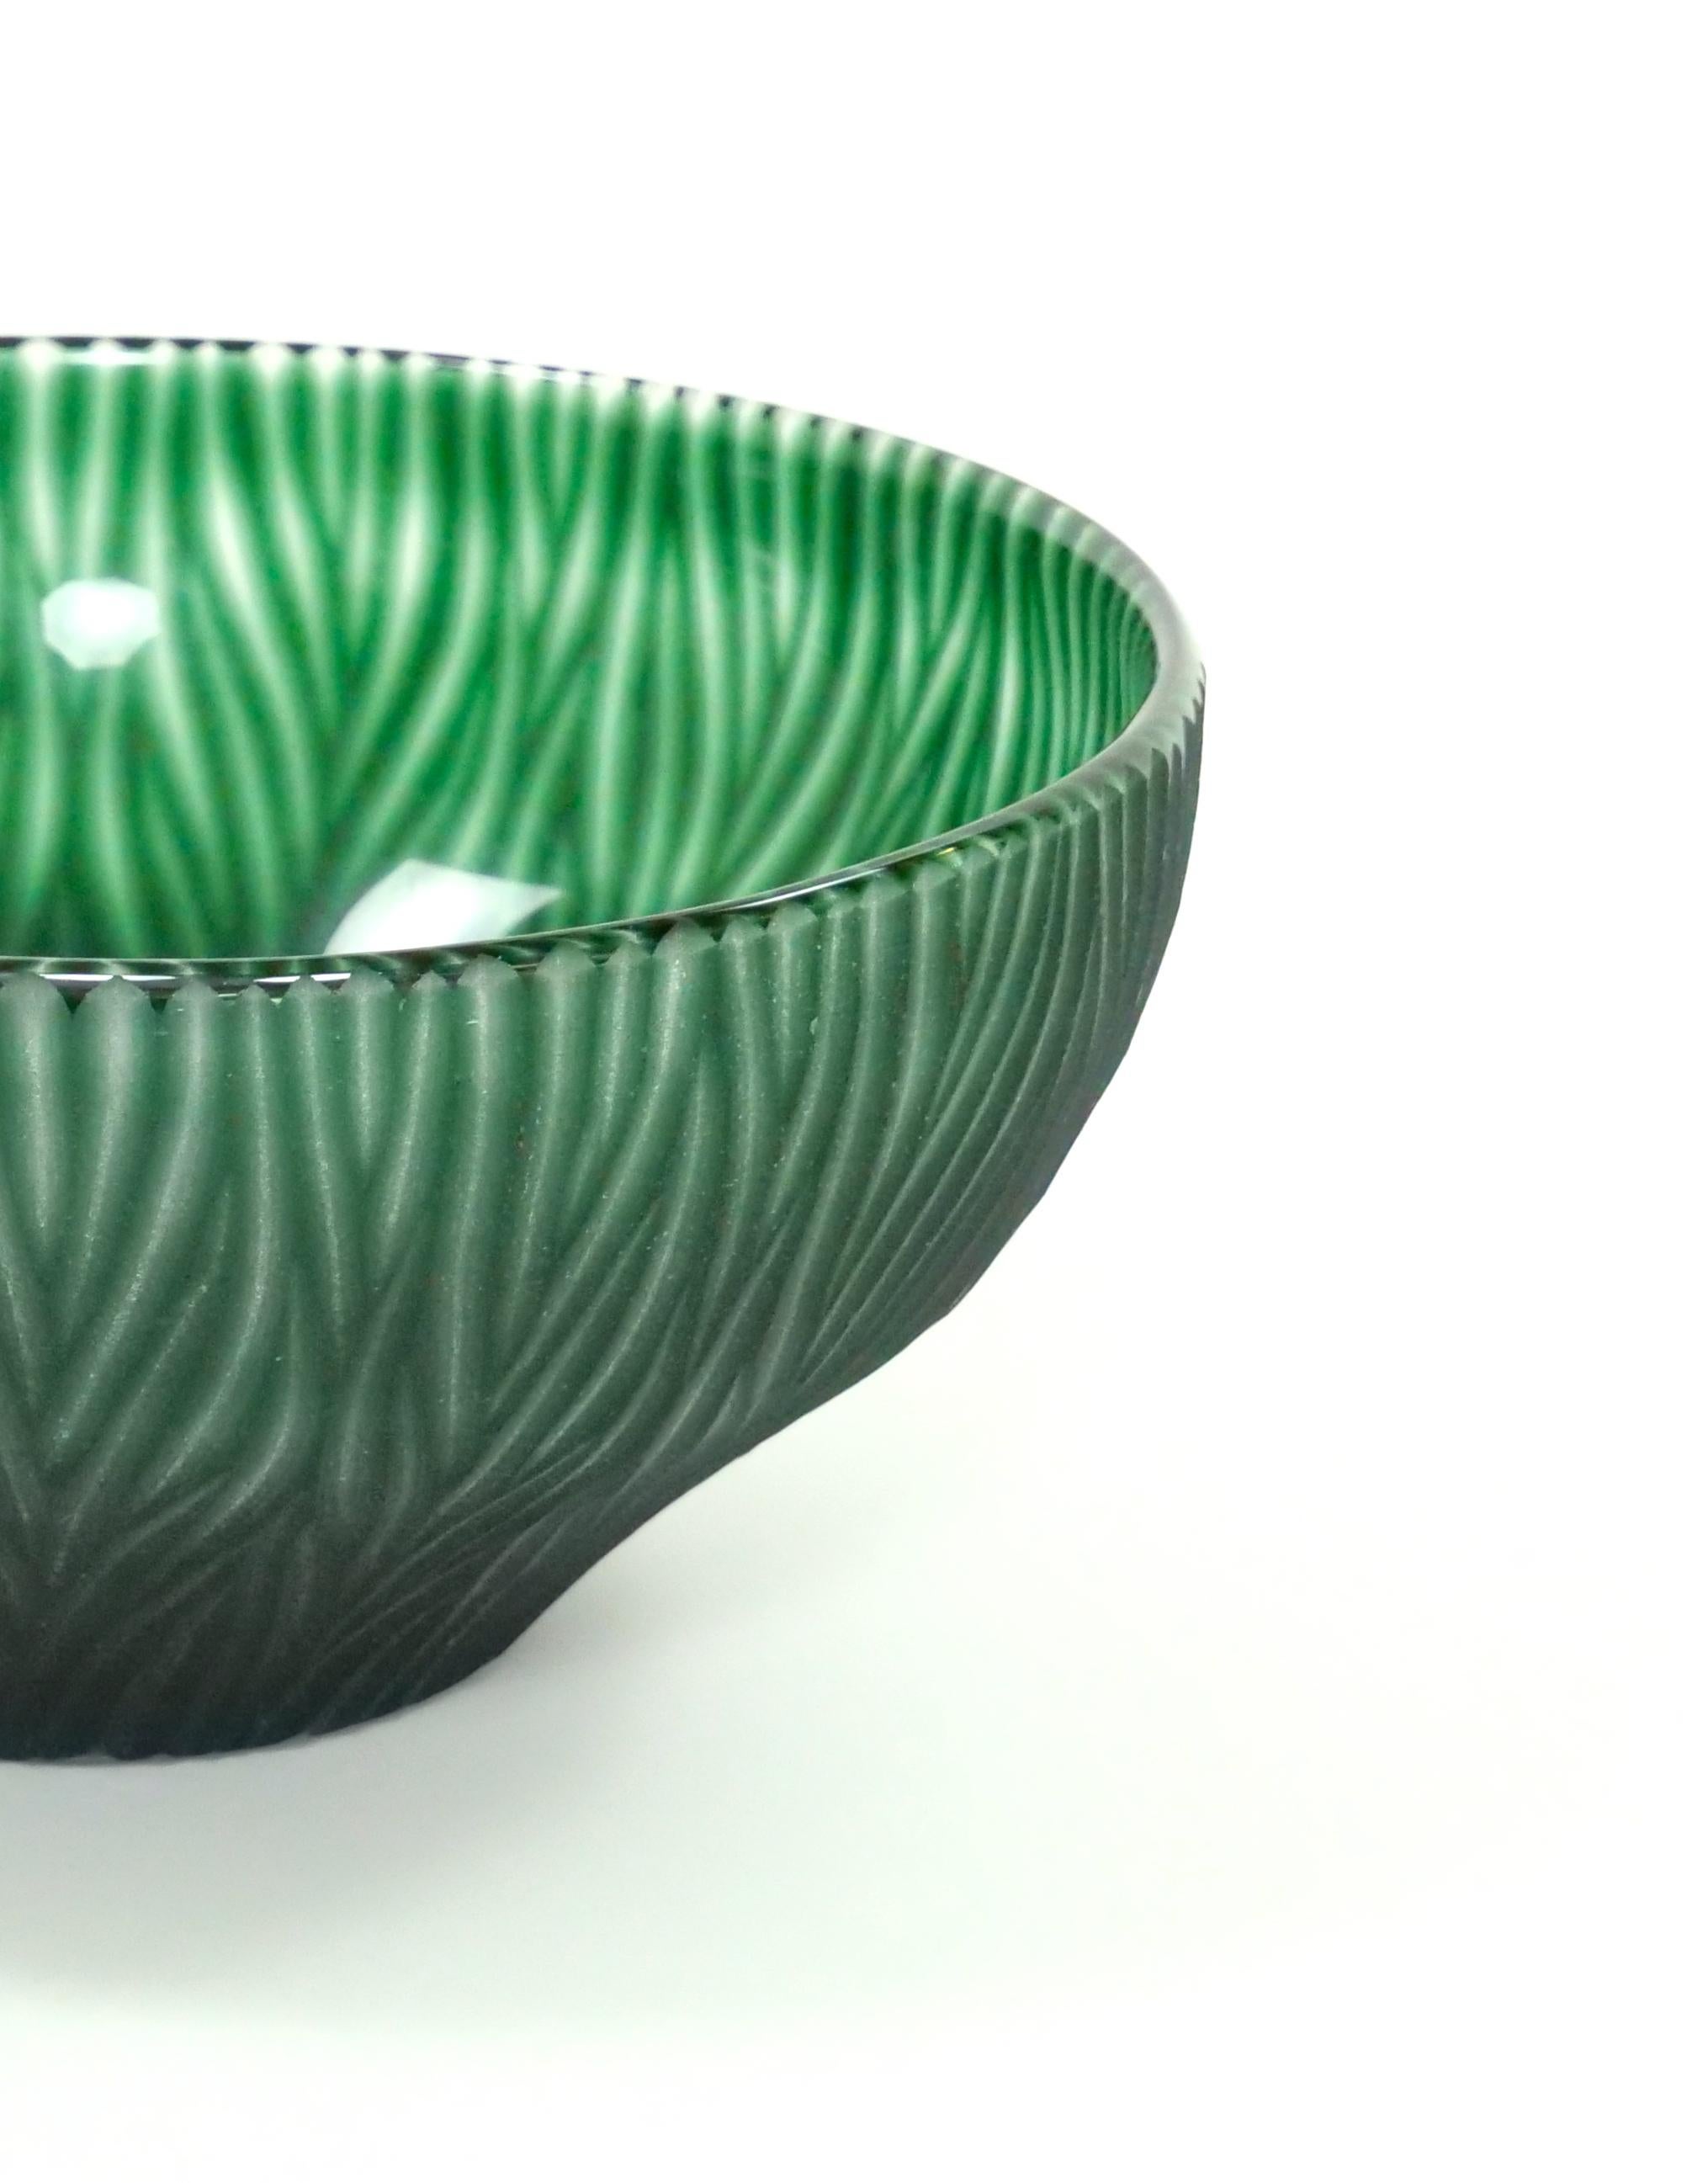 Italian Beautiful Hand Crafted Mouth Blown Murano Glass Centerpiece Bowl  For Sale